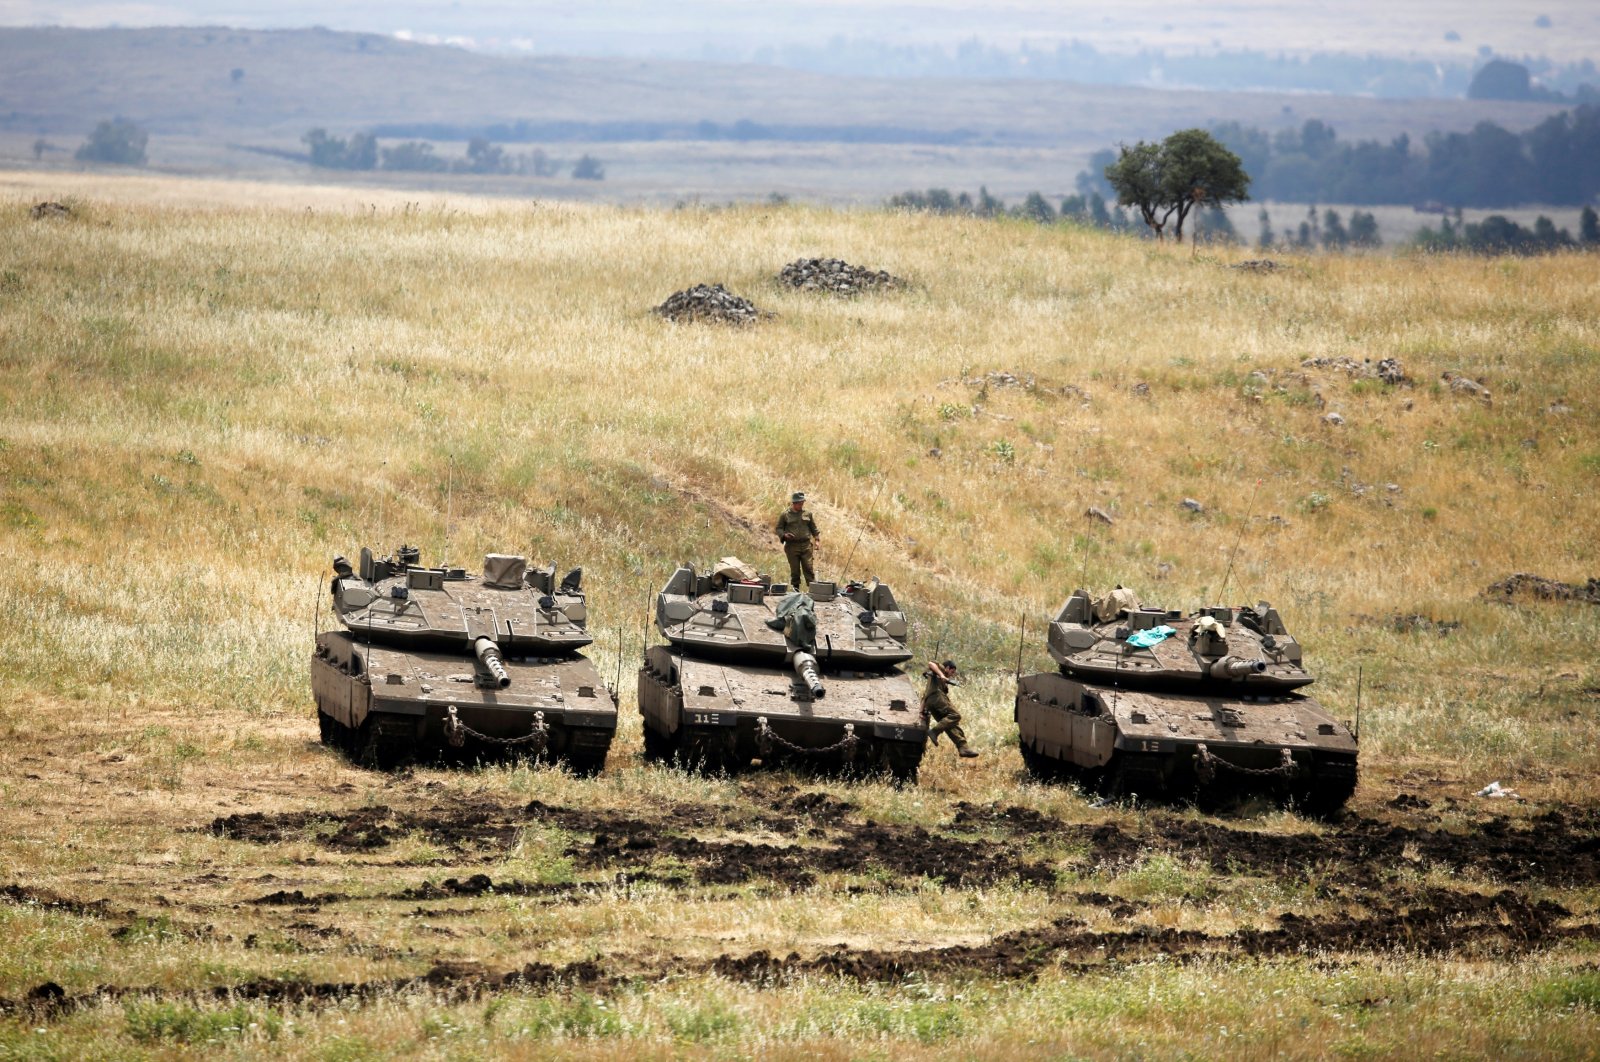 An Israeli soldier stands on a tank as another jumps off it near the Israeli side of the border with Syria in the Israeli-occupied Golan Heights, Israel, May 9, 2018. (Reuters Photo)